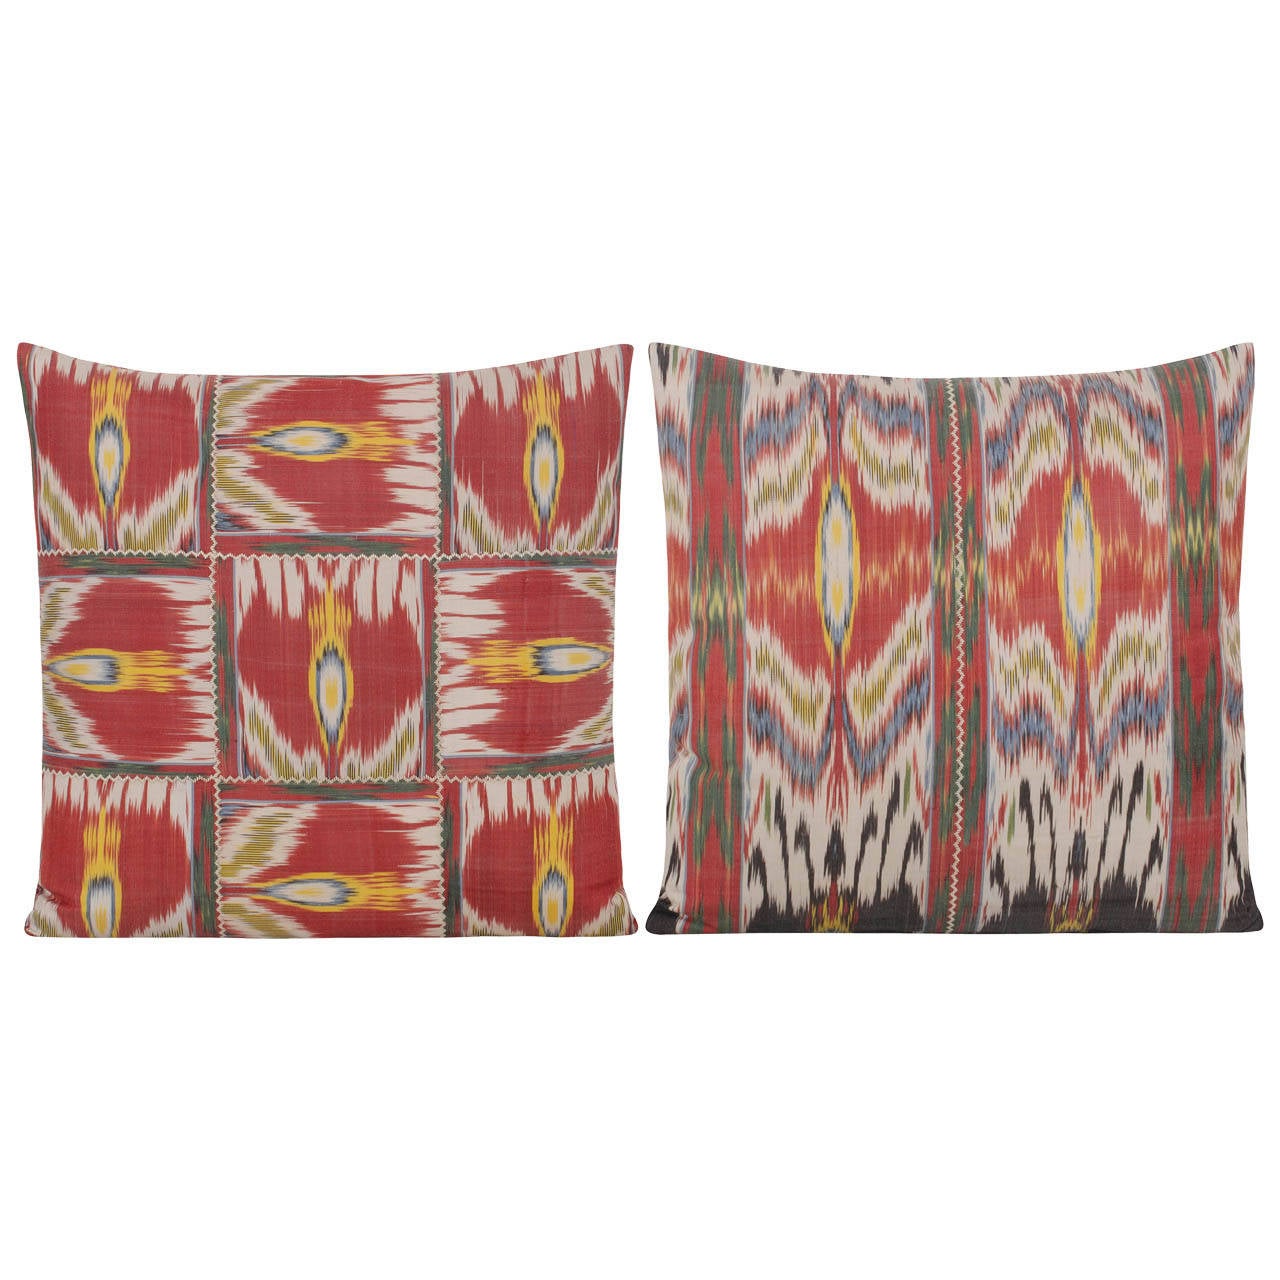 Pair of Yastik Isolabella Ikat Square Cushions by Rifat Ozbek For Sale